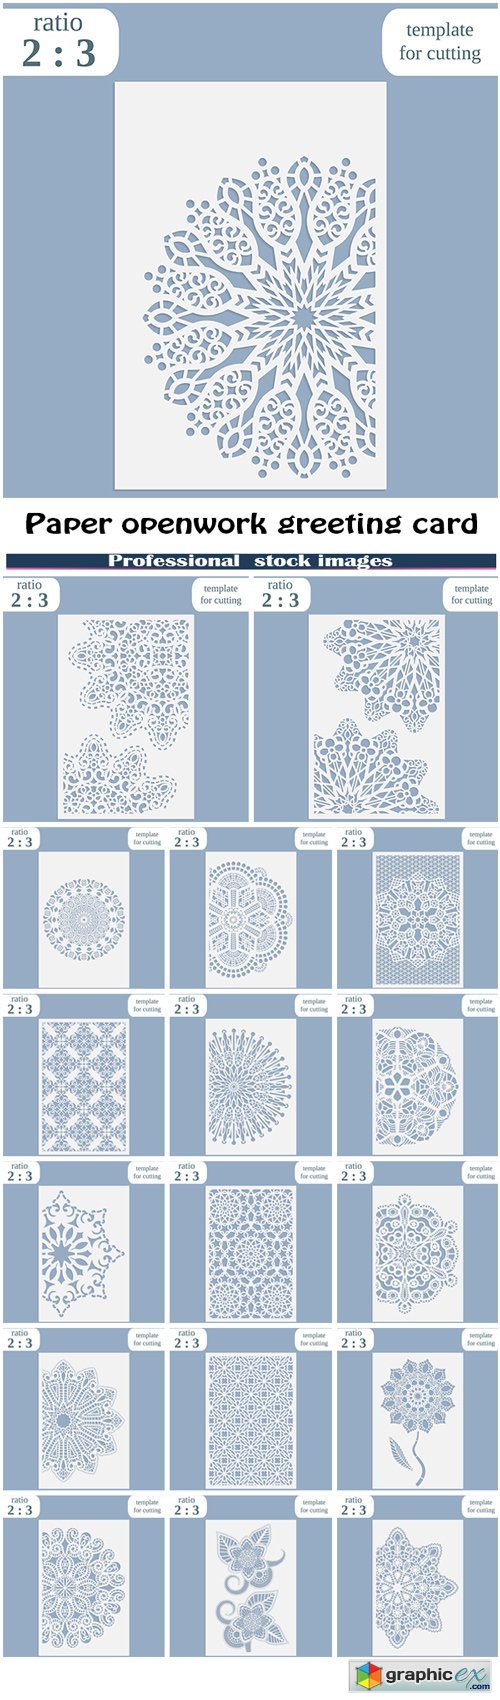 Paper openwork greeting card template for cutting